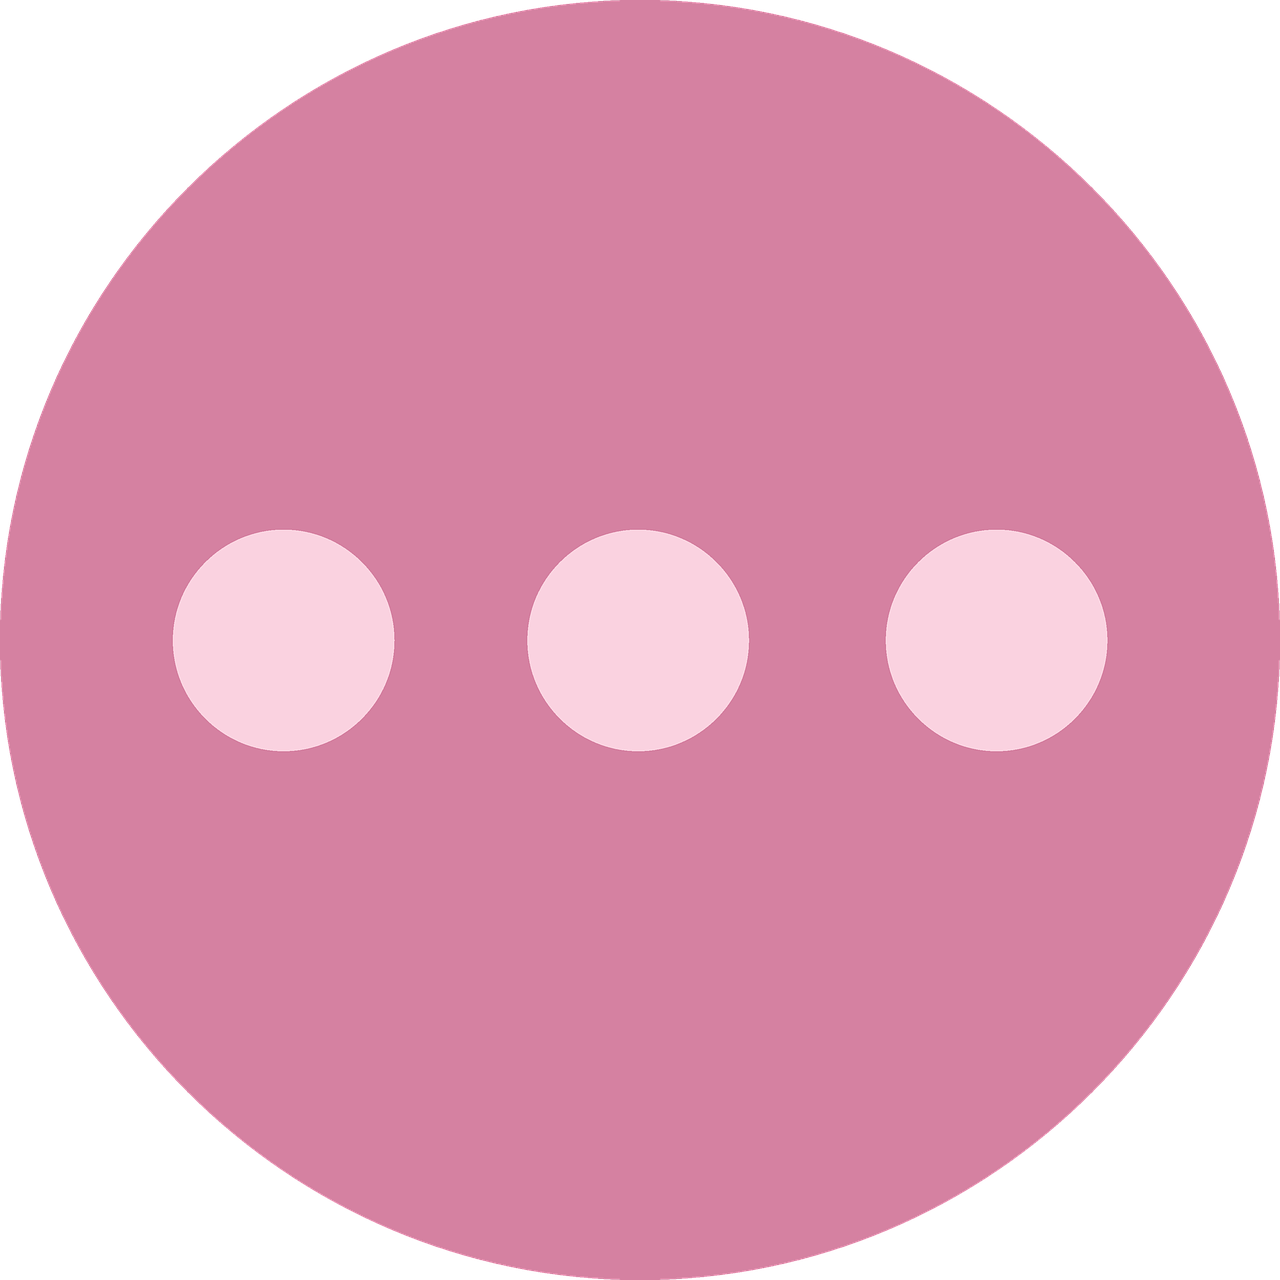 a pink speech bubble with three white dots, inspired by Kōno Bairei, textless, nonbinary model, rondel, !5 three eyed goddesses